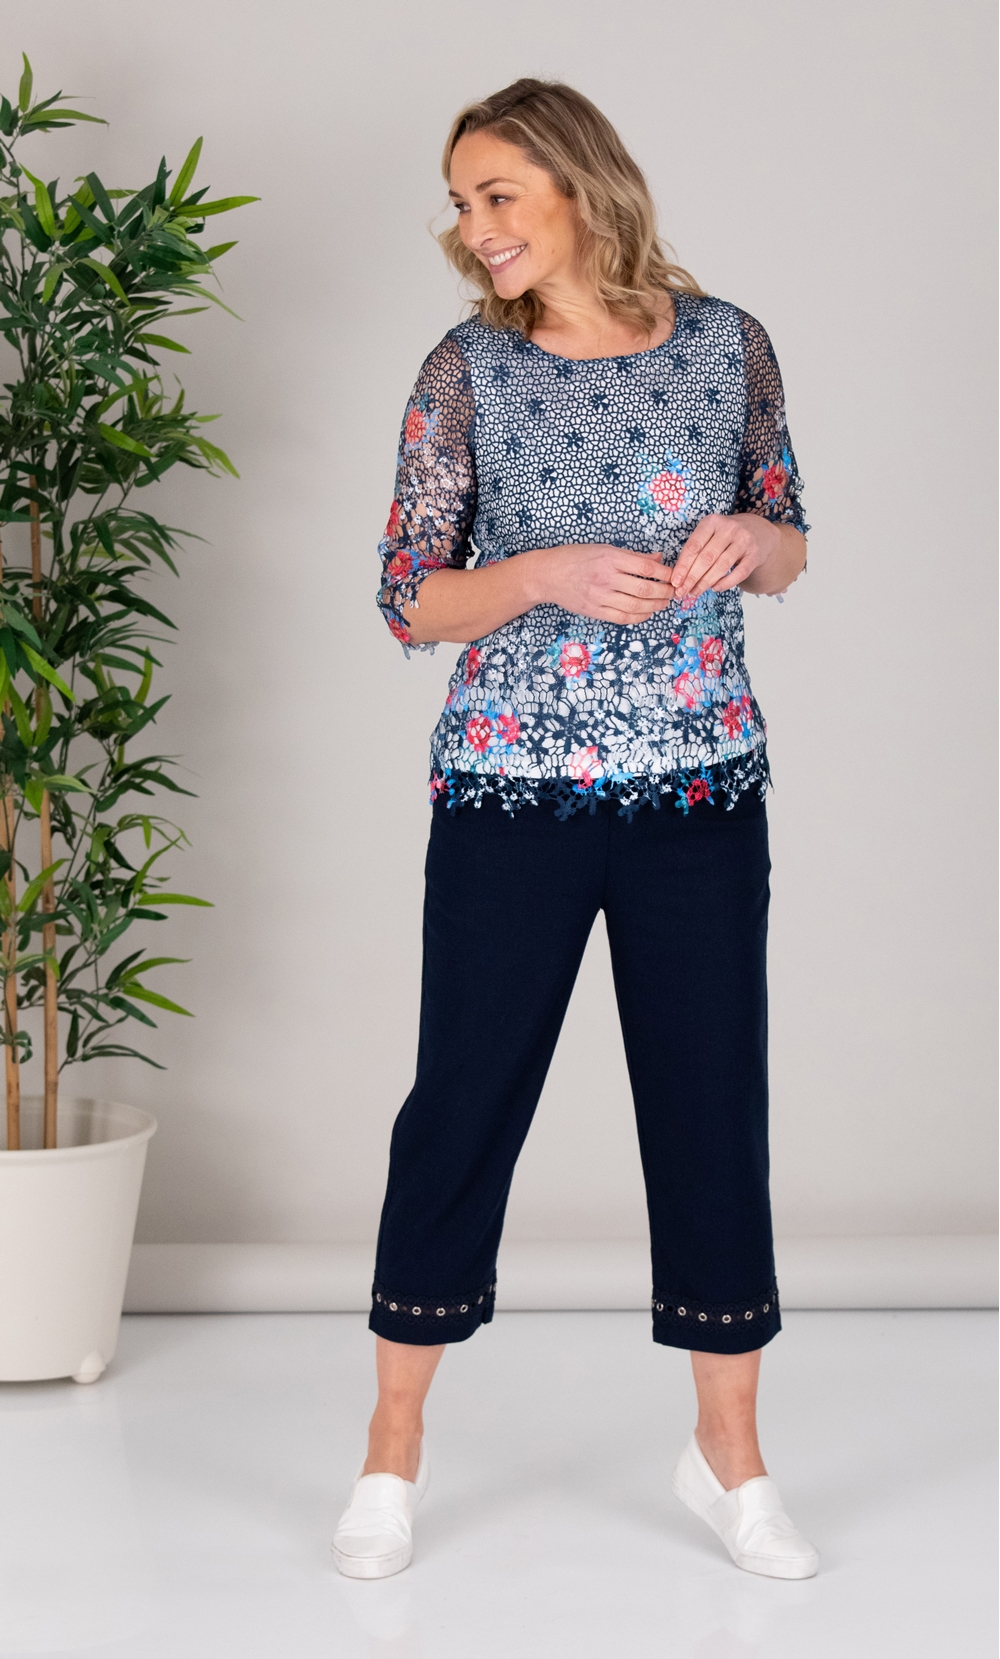 Anna Rose Border Print Lace Layer Top